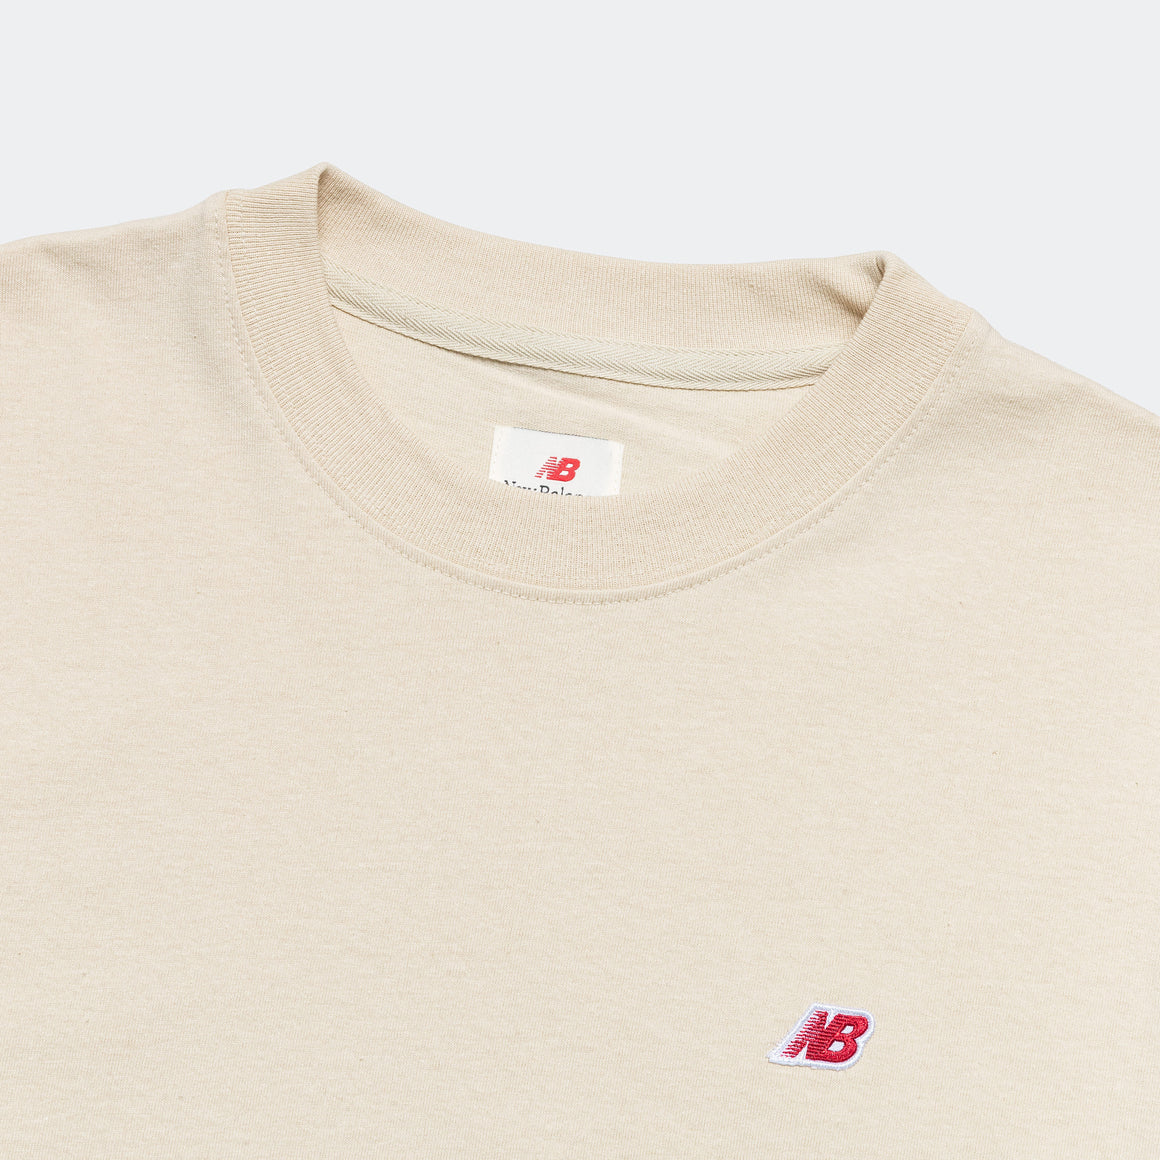 MADE in USA Core SS Tee - Sandstone